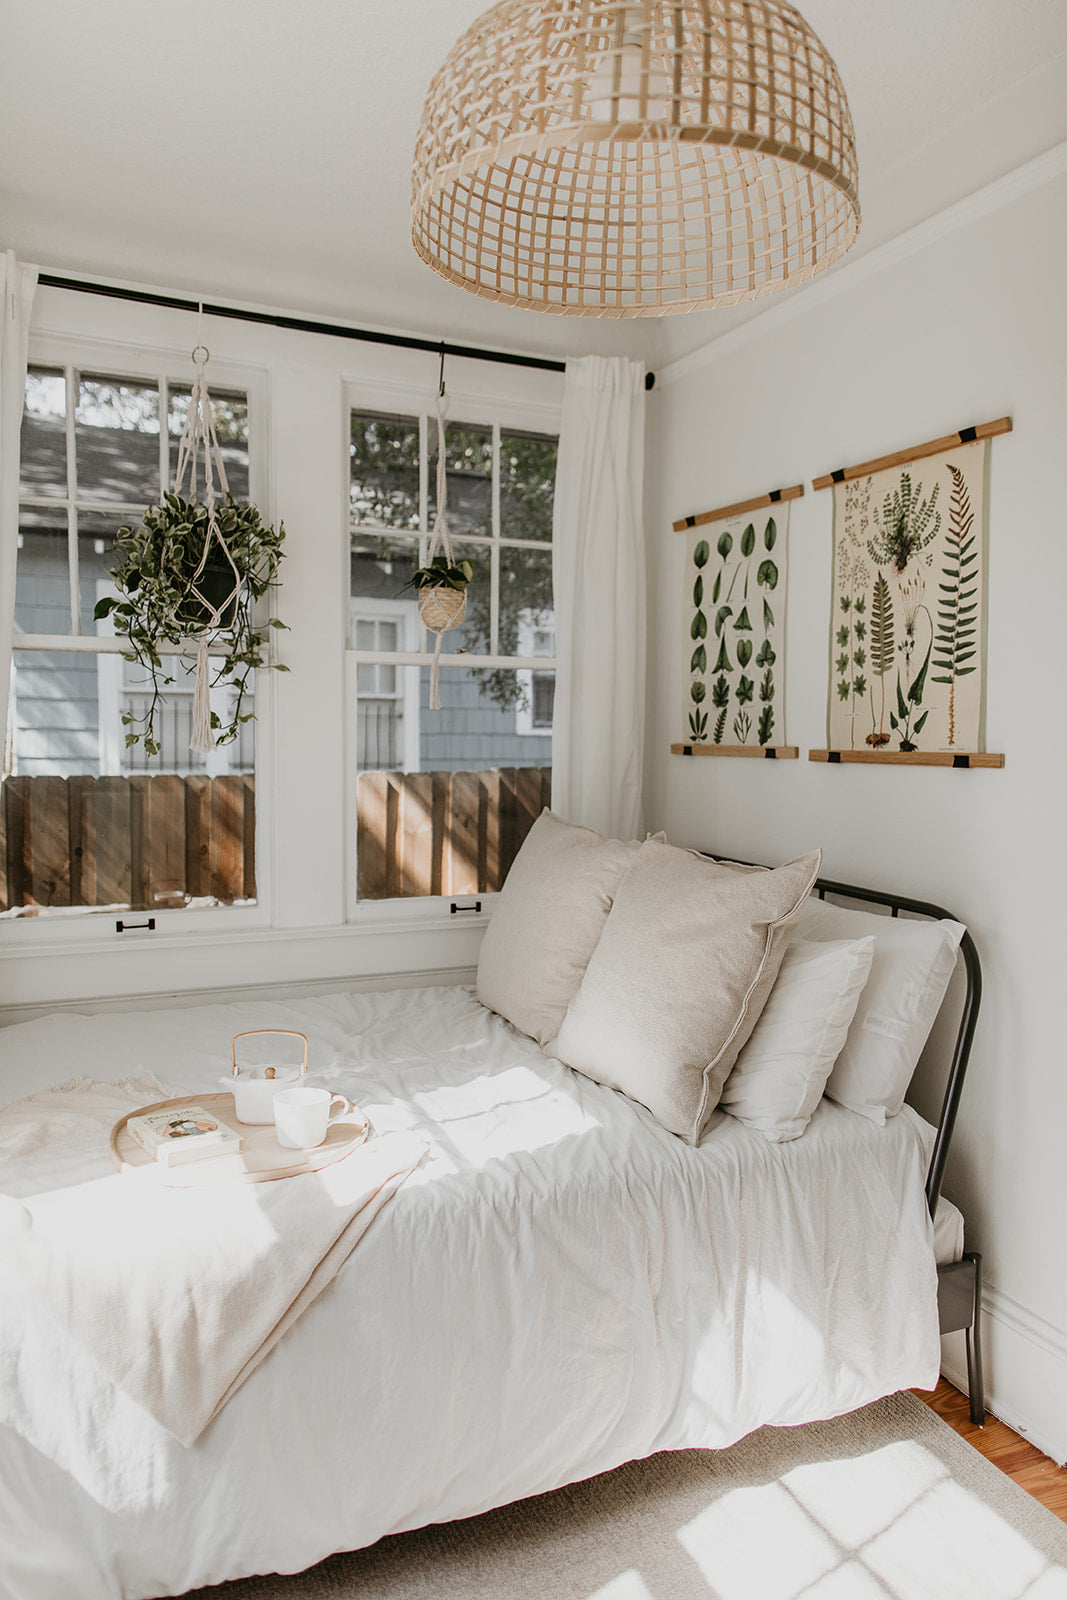 bed with a white sheet and a hanging light fixture